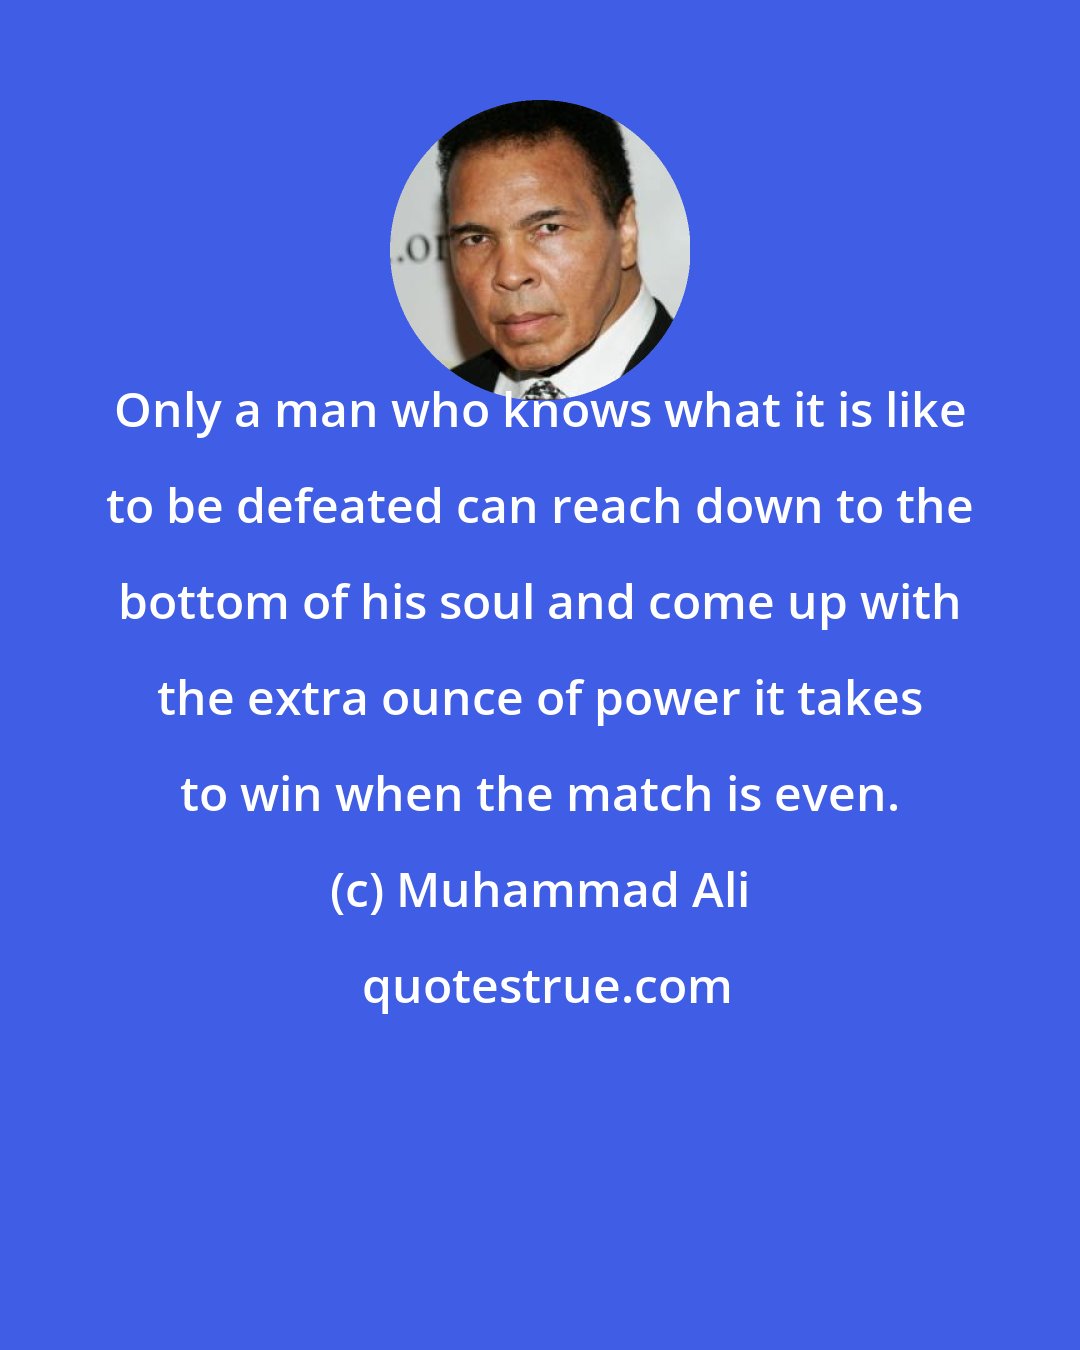 Muhammad Ali: Only a man who knows what it is like to be defeated can reach down to the bottom of his soul and come up with the extra ounce of power it takes to win when the match is even.